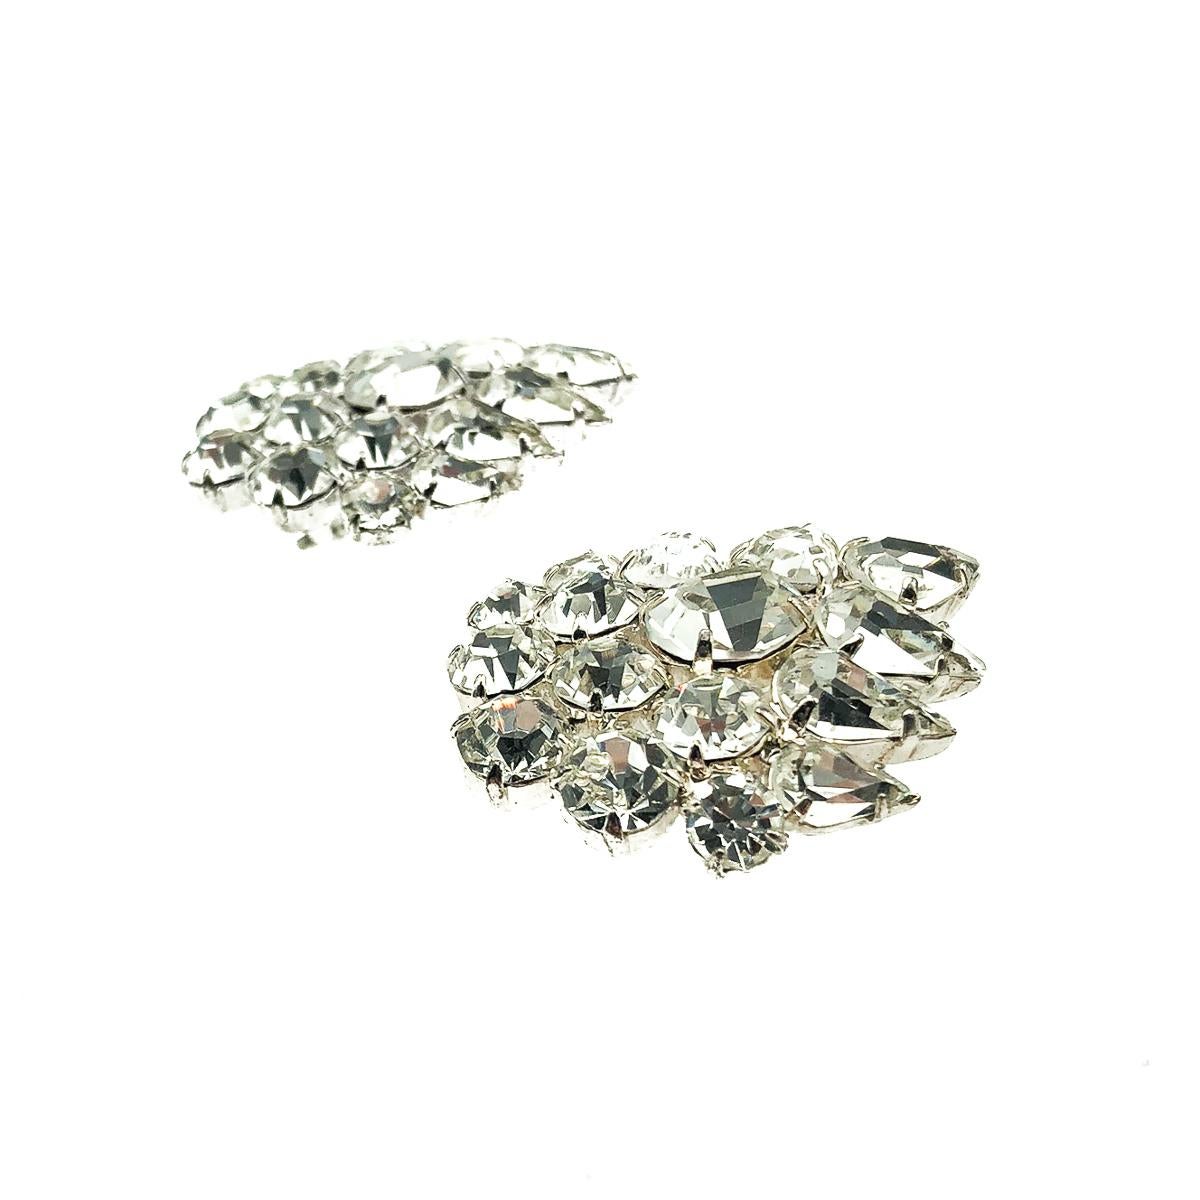 Adorable Vintage Crystal Cluster Earrings from the 1980s. Crafted in silver tone metal and set with a glorious myriad of fancy cut glass crystals of exceptional size and quality including teardrop, round and oval. In very good vintage condition,